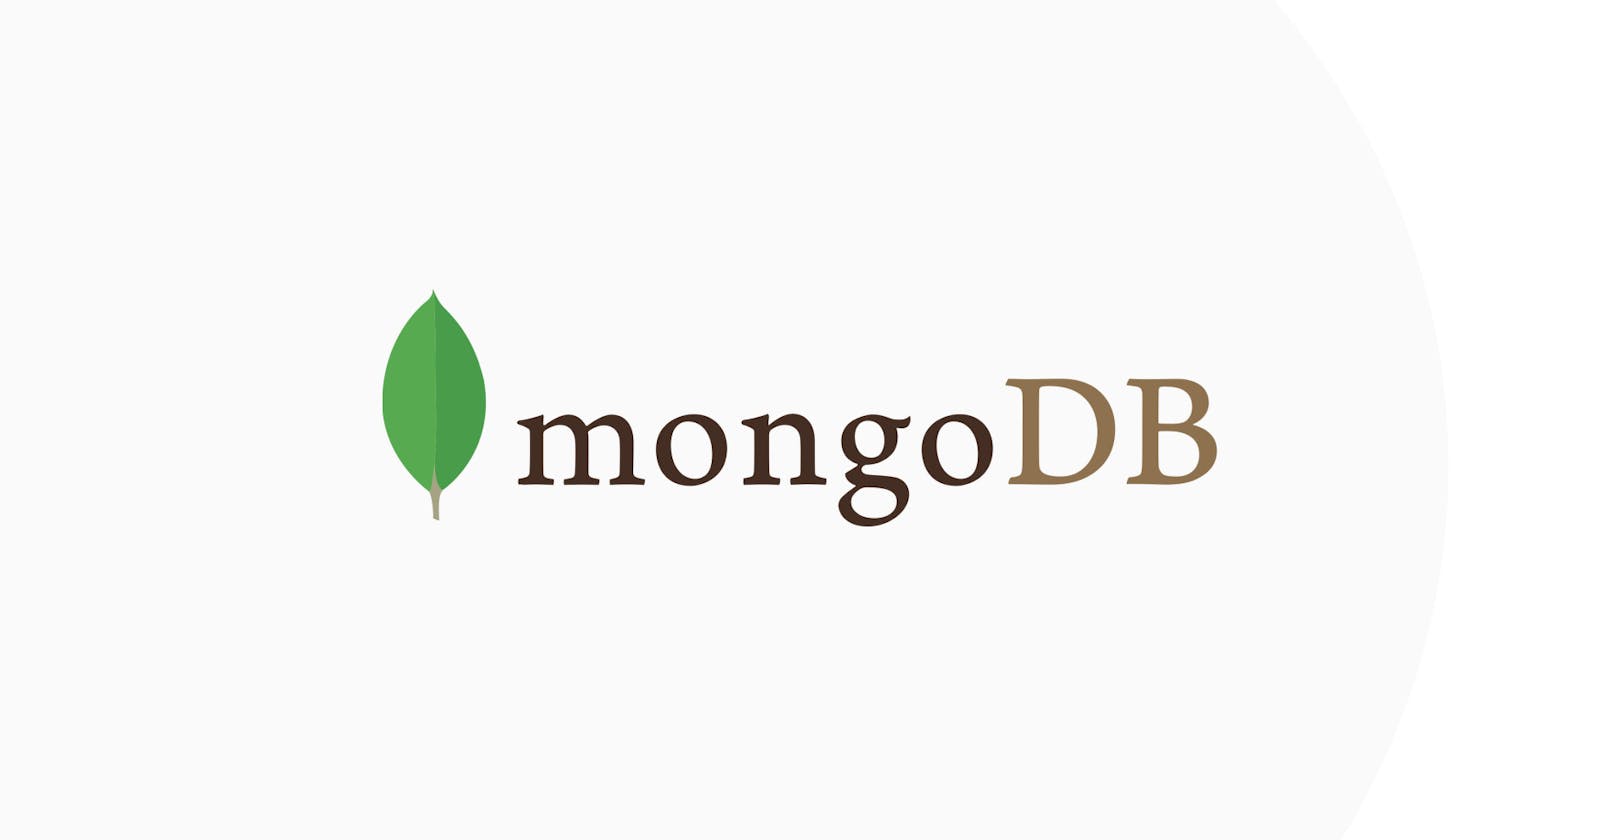 Getting started with MongoDB.